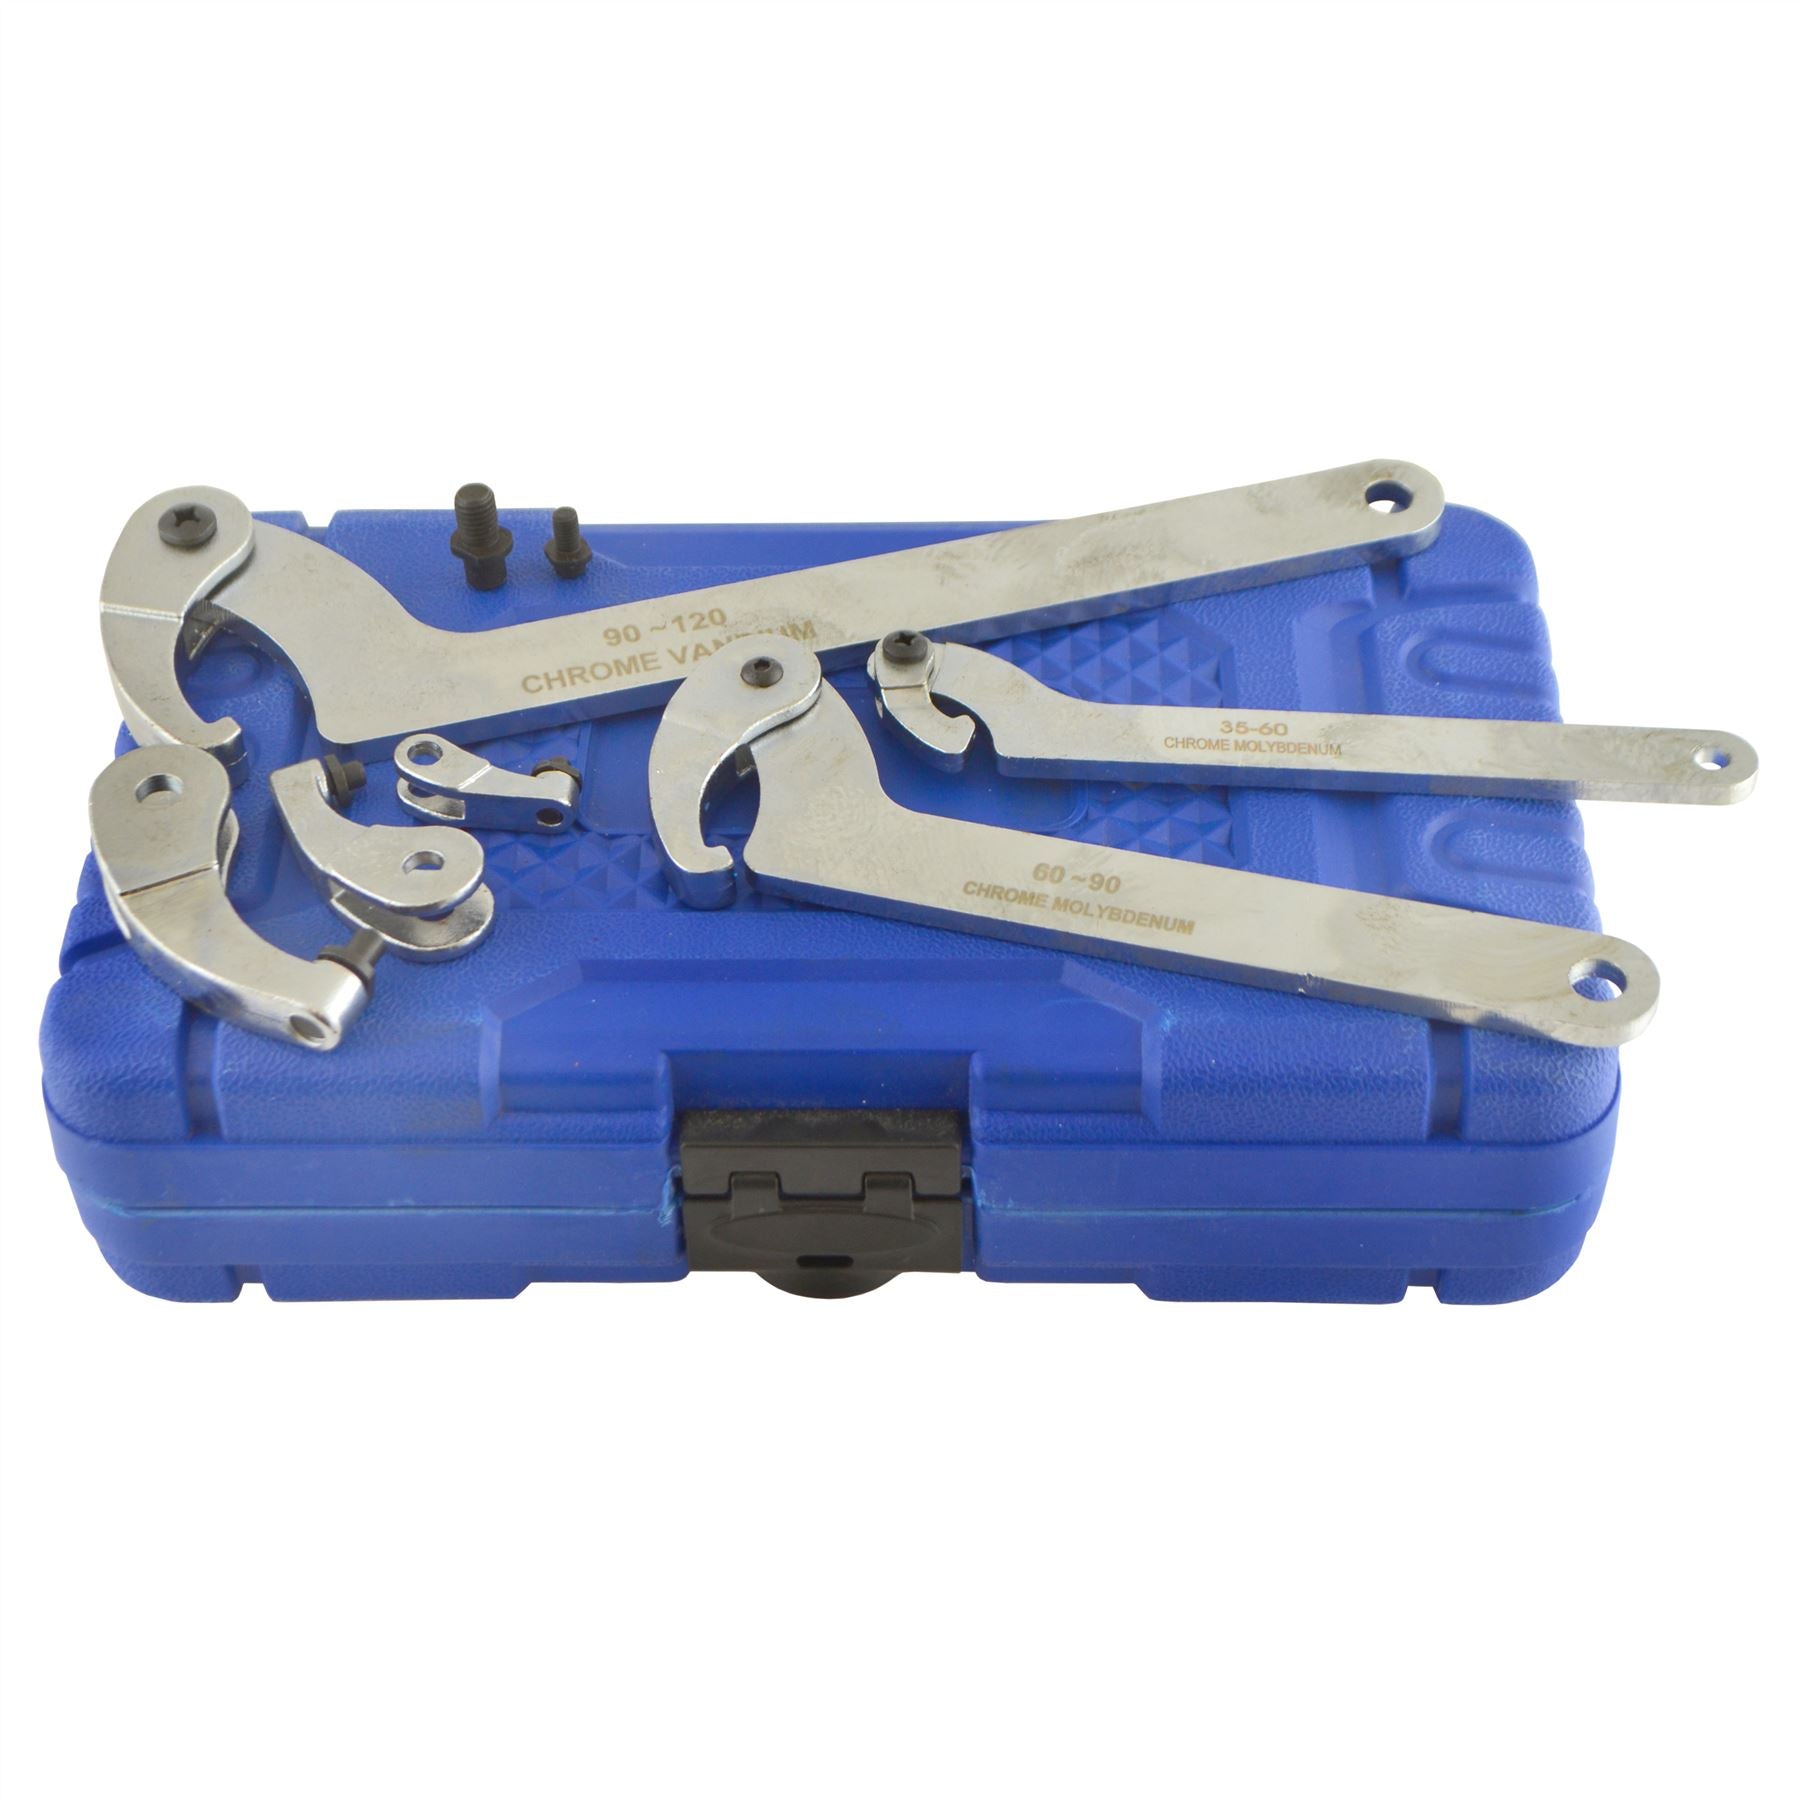 Adjustable Hook And Pin Wrench Spanners C Spanner 35mm - 120mm 6pc Set